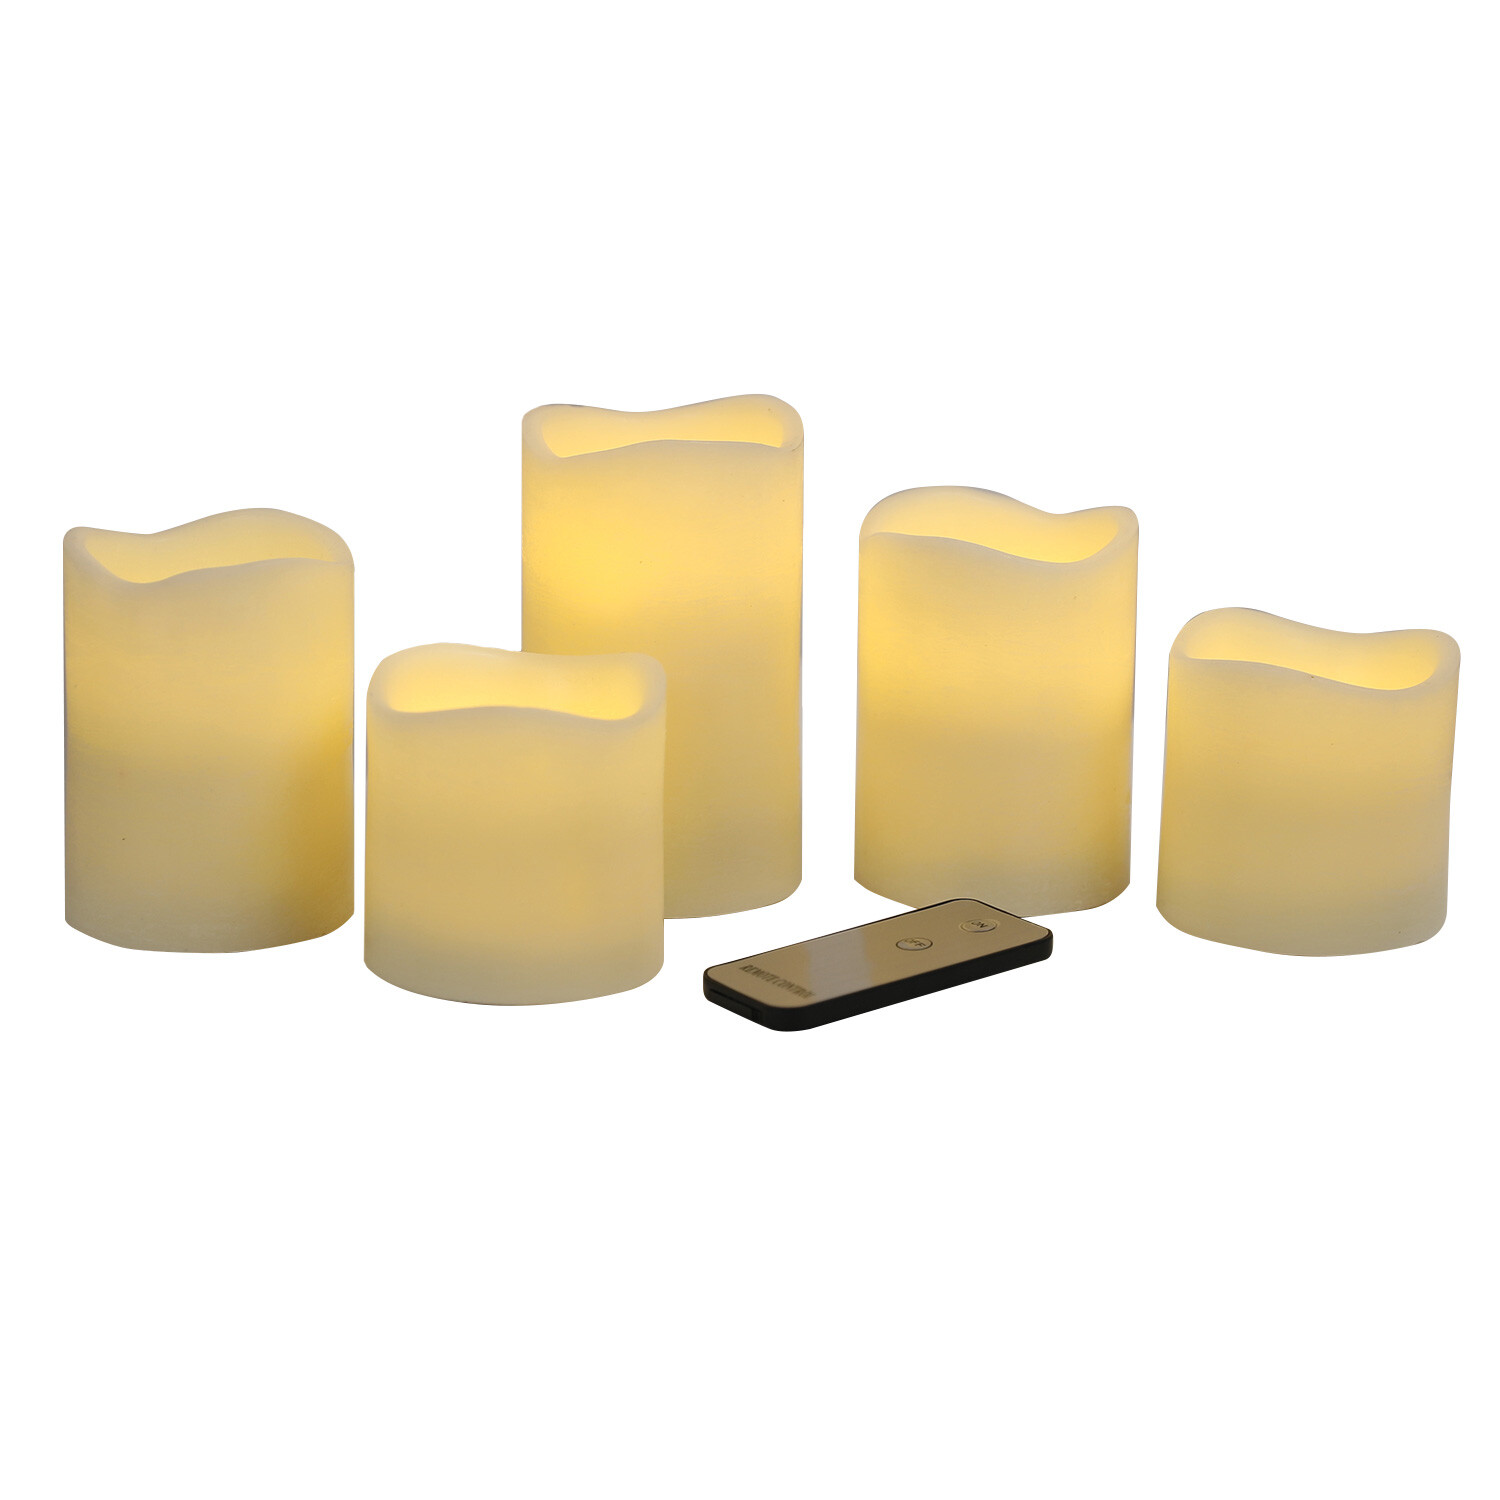 Flickering LED Candles 5 Pack Image 1